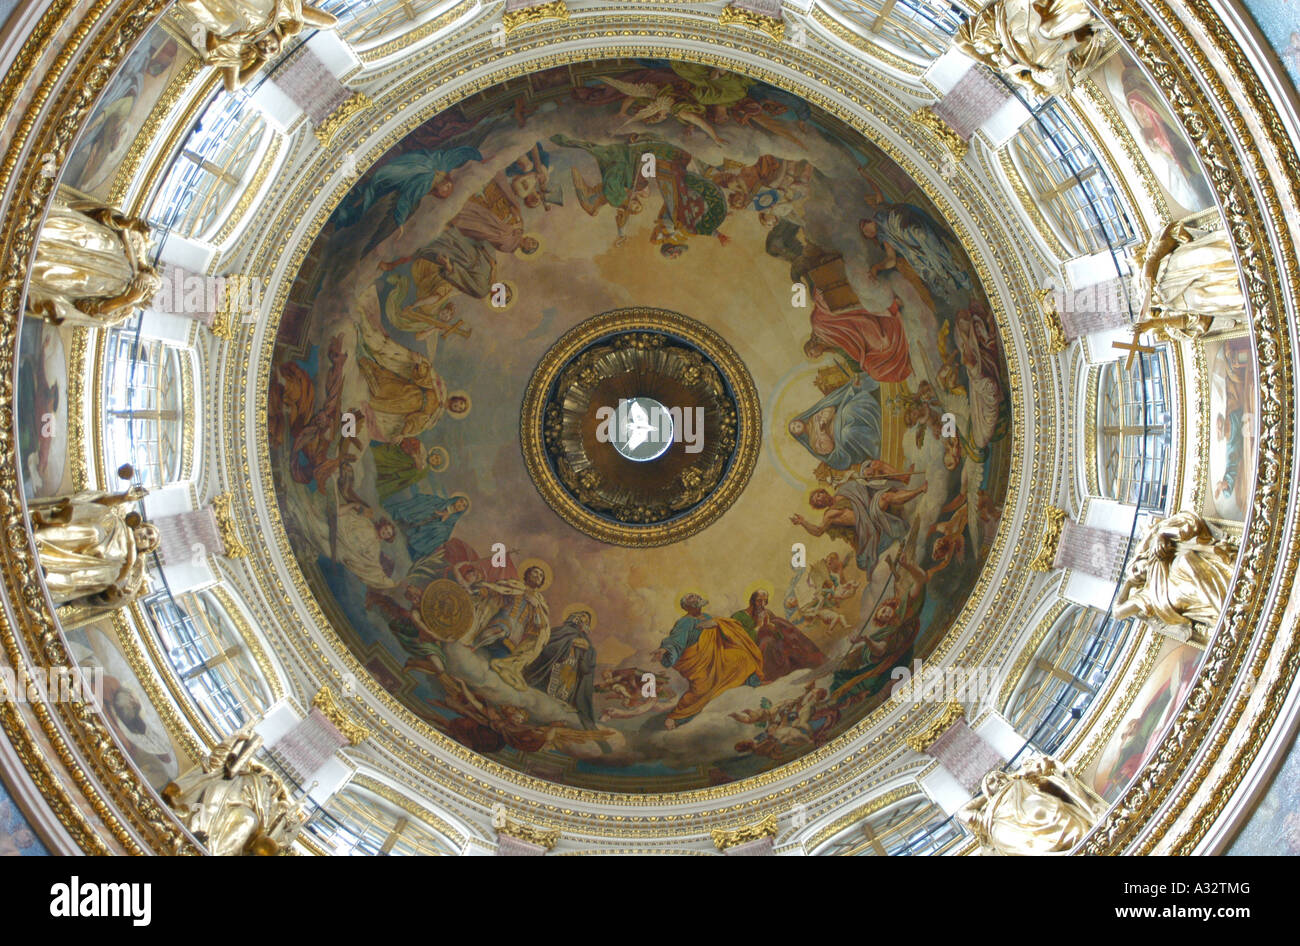 Dome of Saint Isaac's Cathedral, the masterpiece of Russian painter Karl Briullov (Carlo Brullo), in Saint Petersburg, Russia Stock Photo